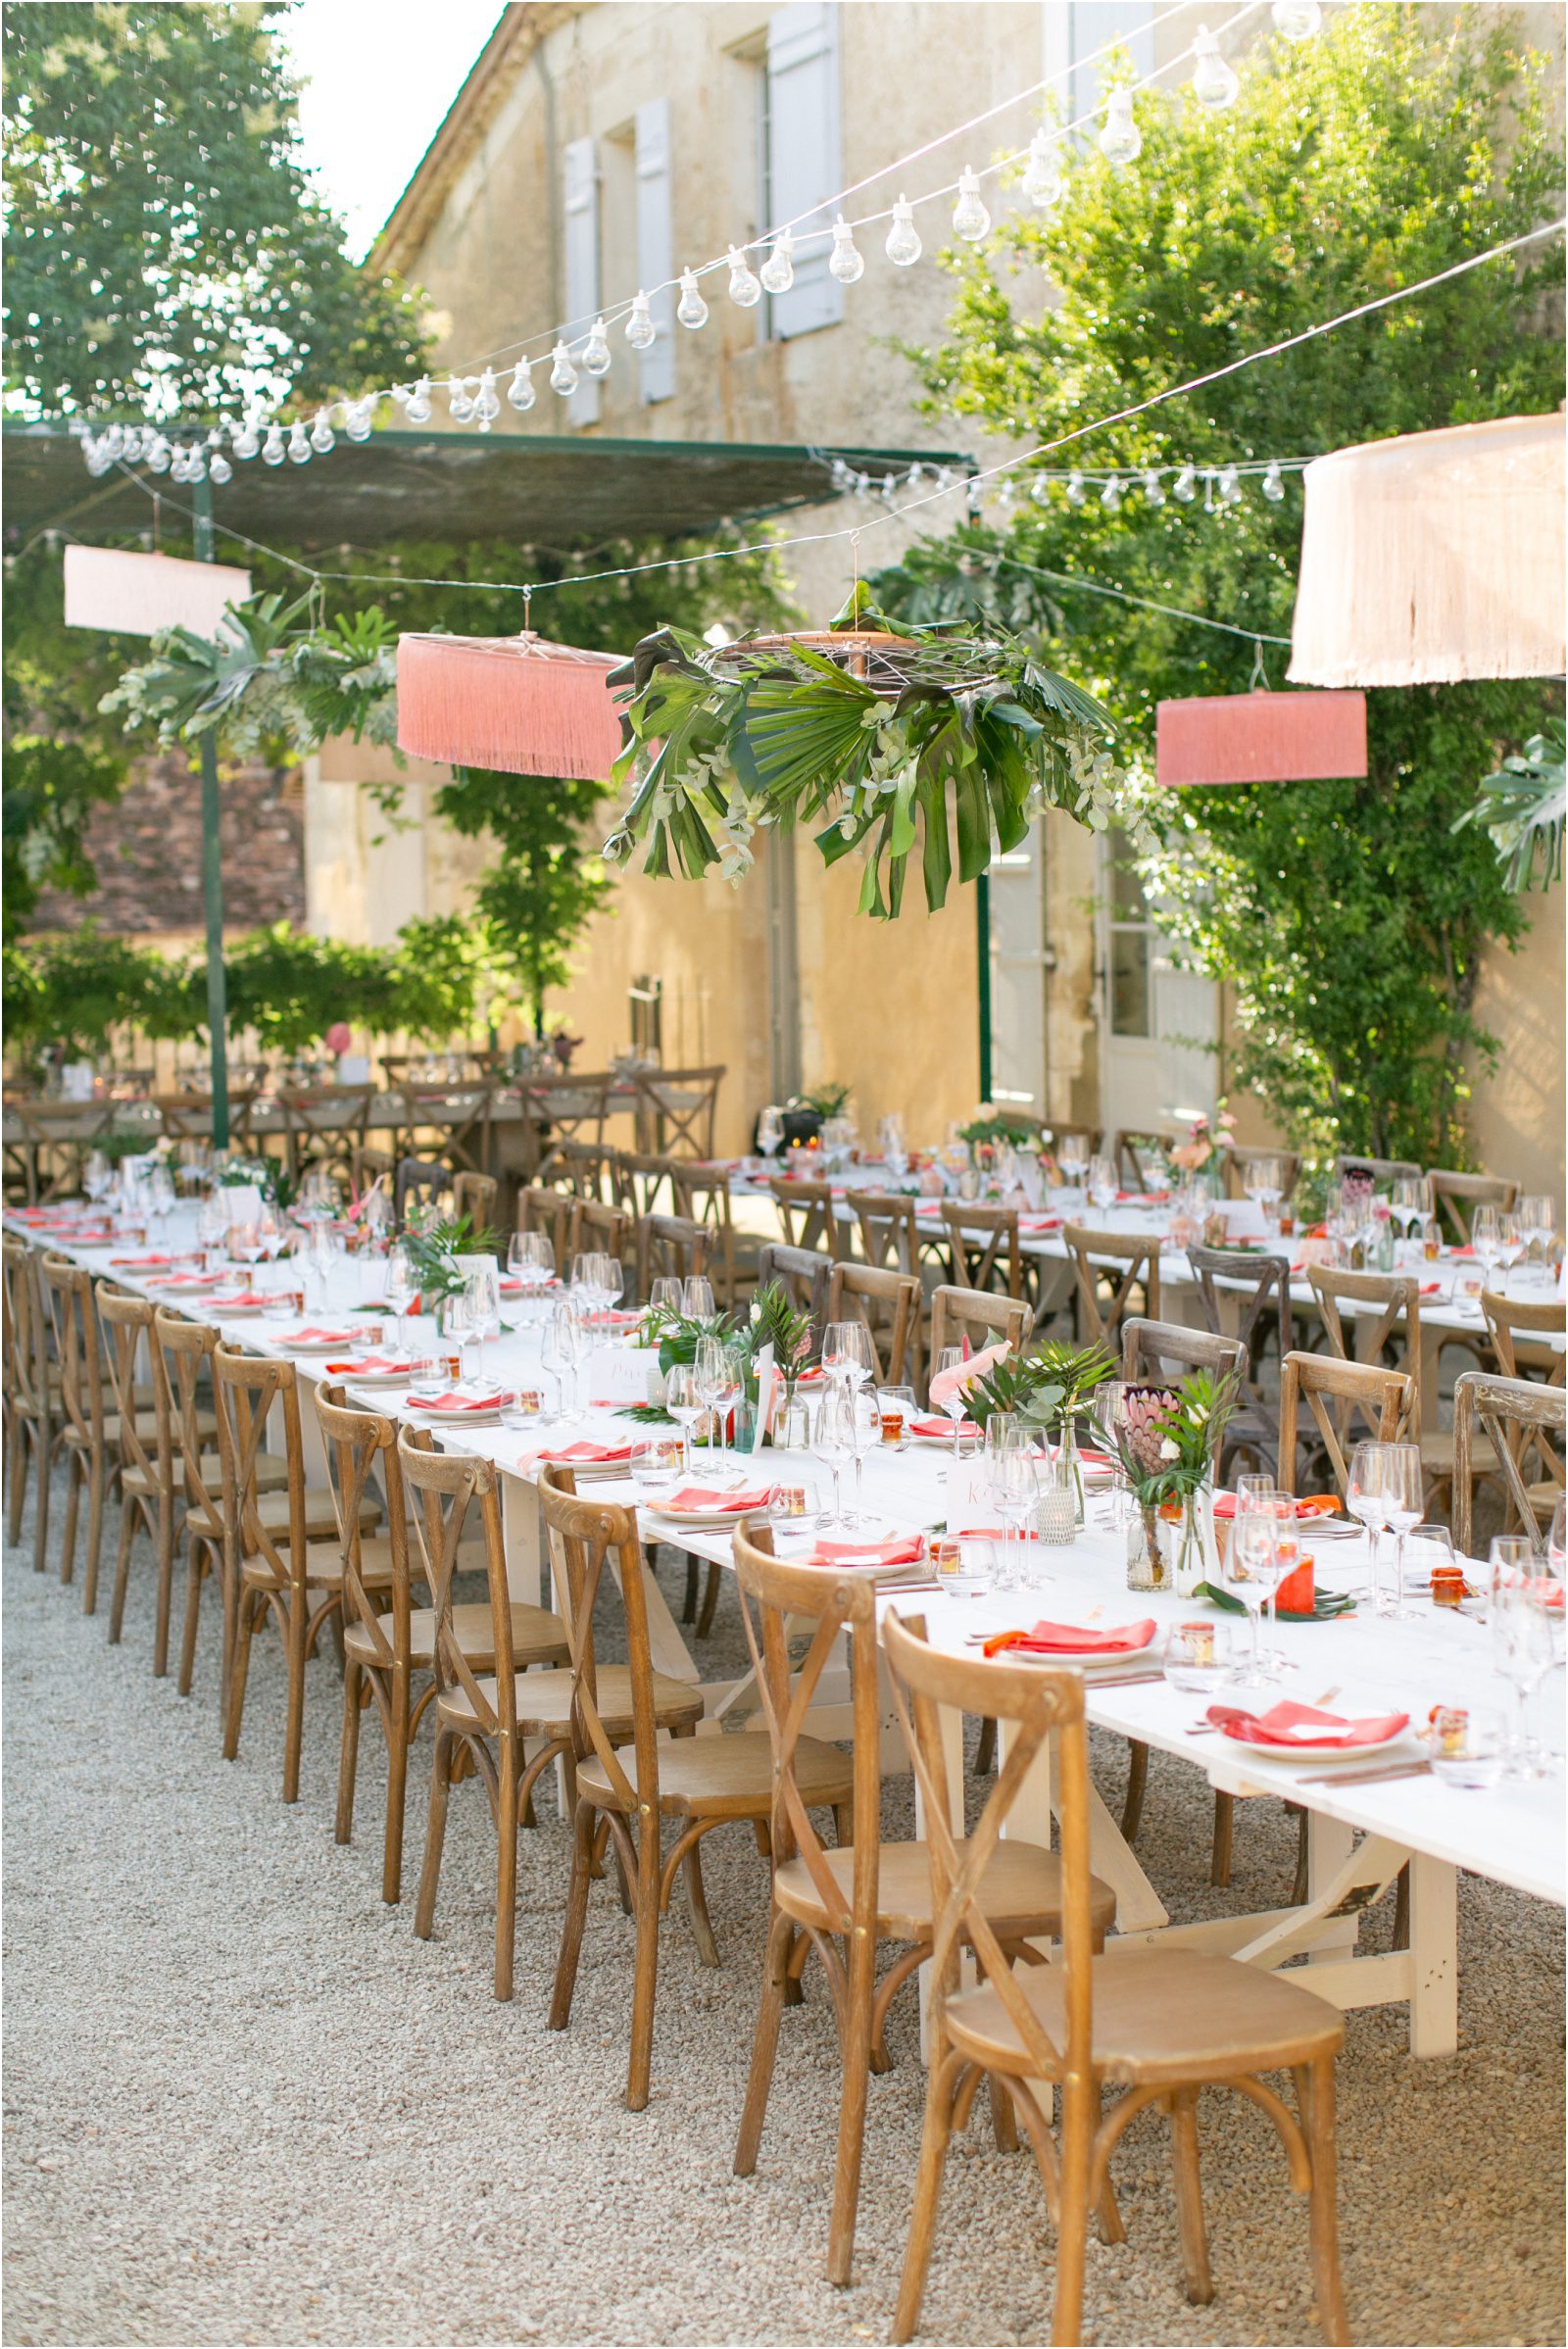 French Tropical Chic wedding style at La Leotardie in France